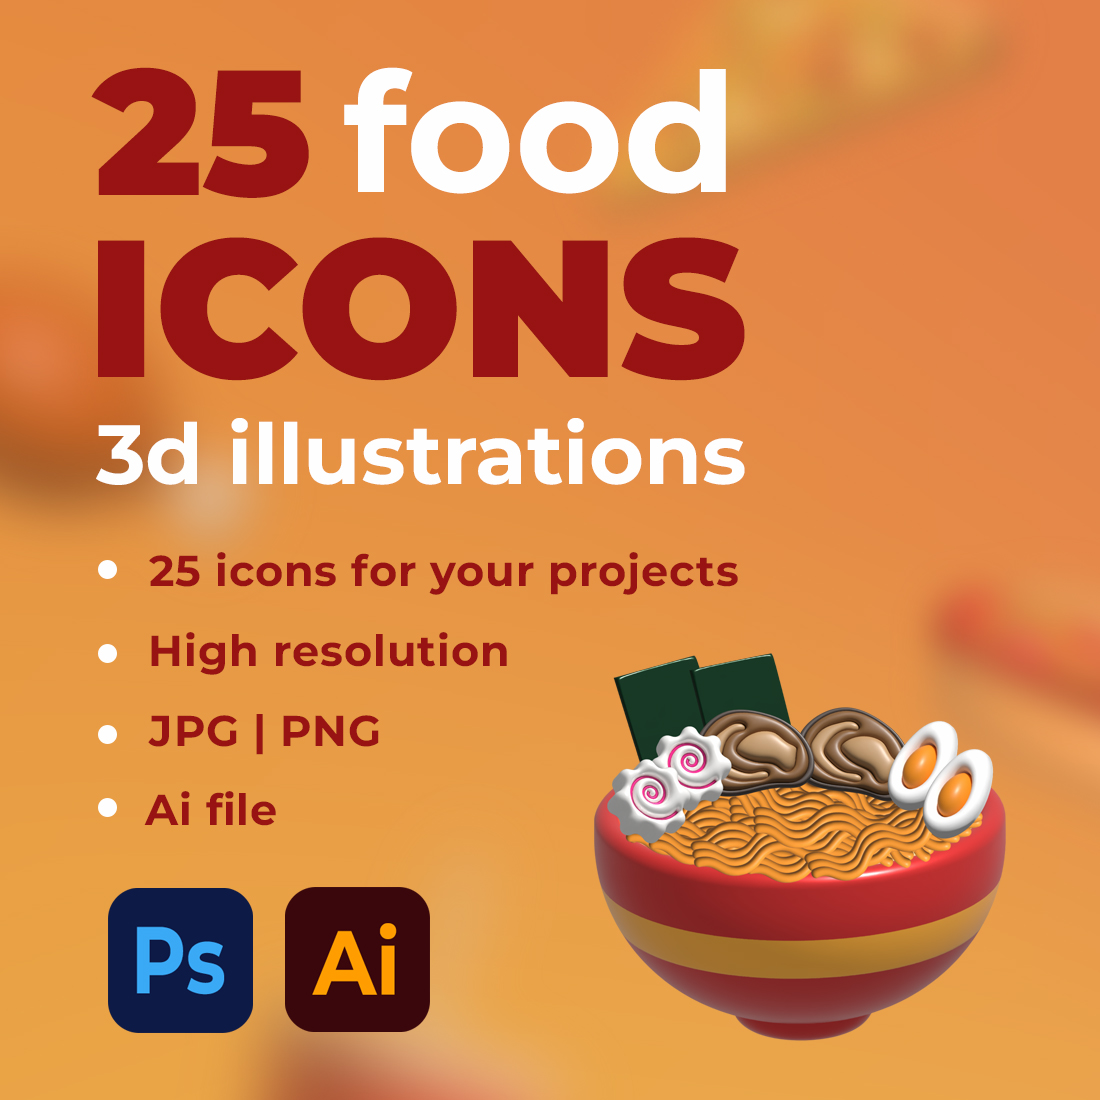 3D Food Icons Collection presentation.